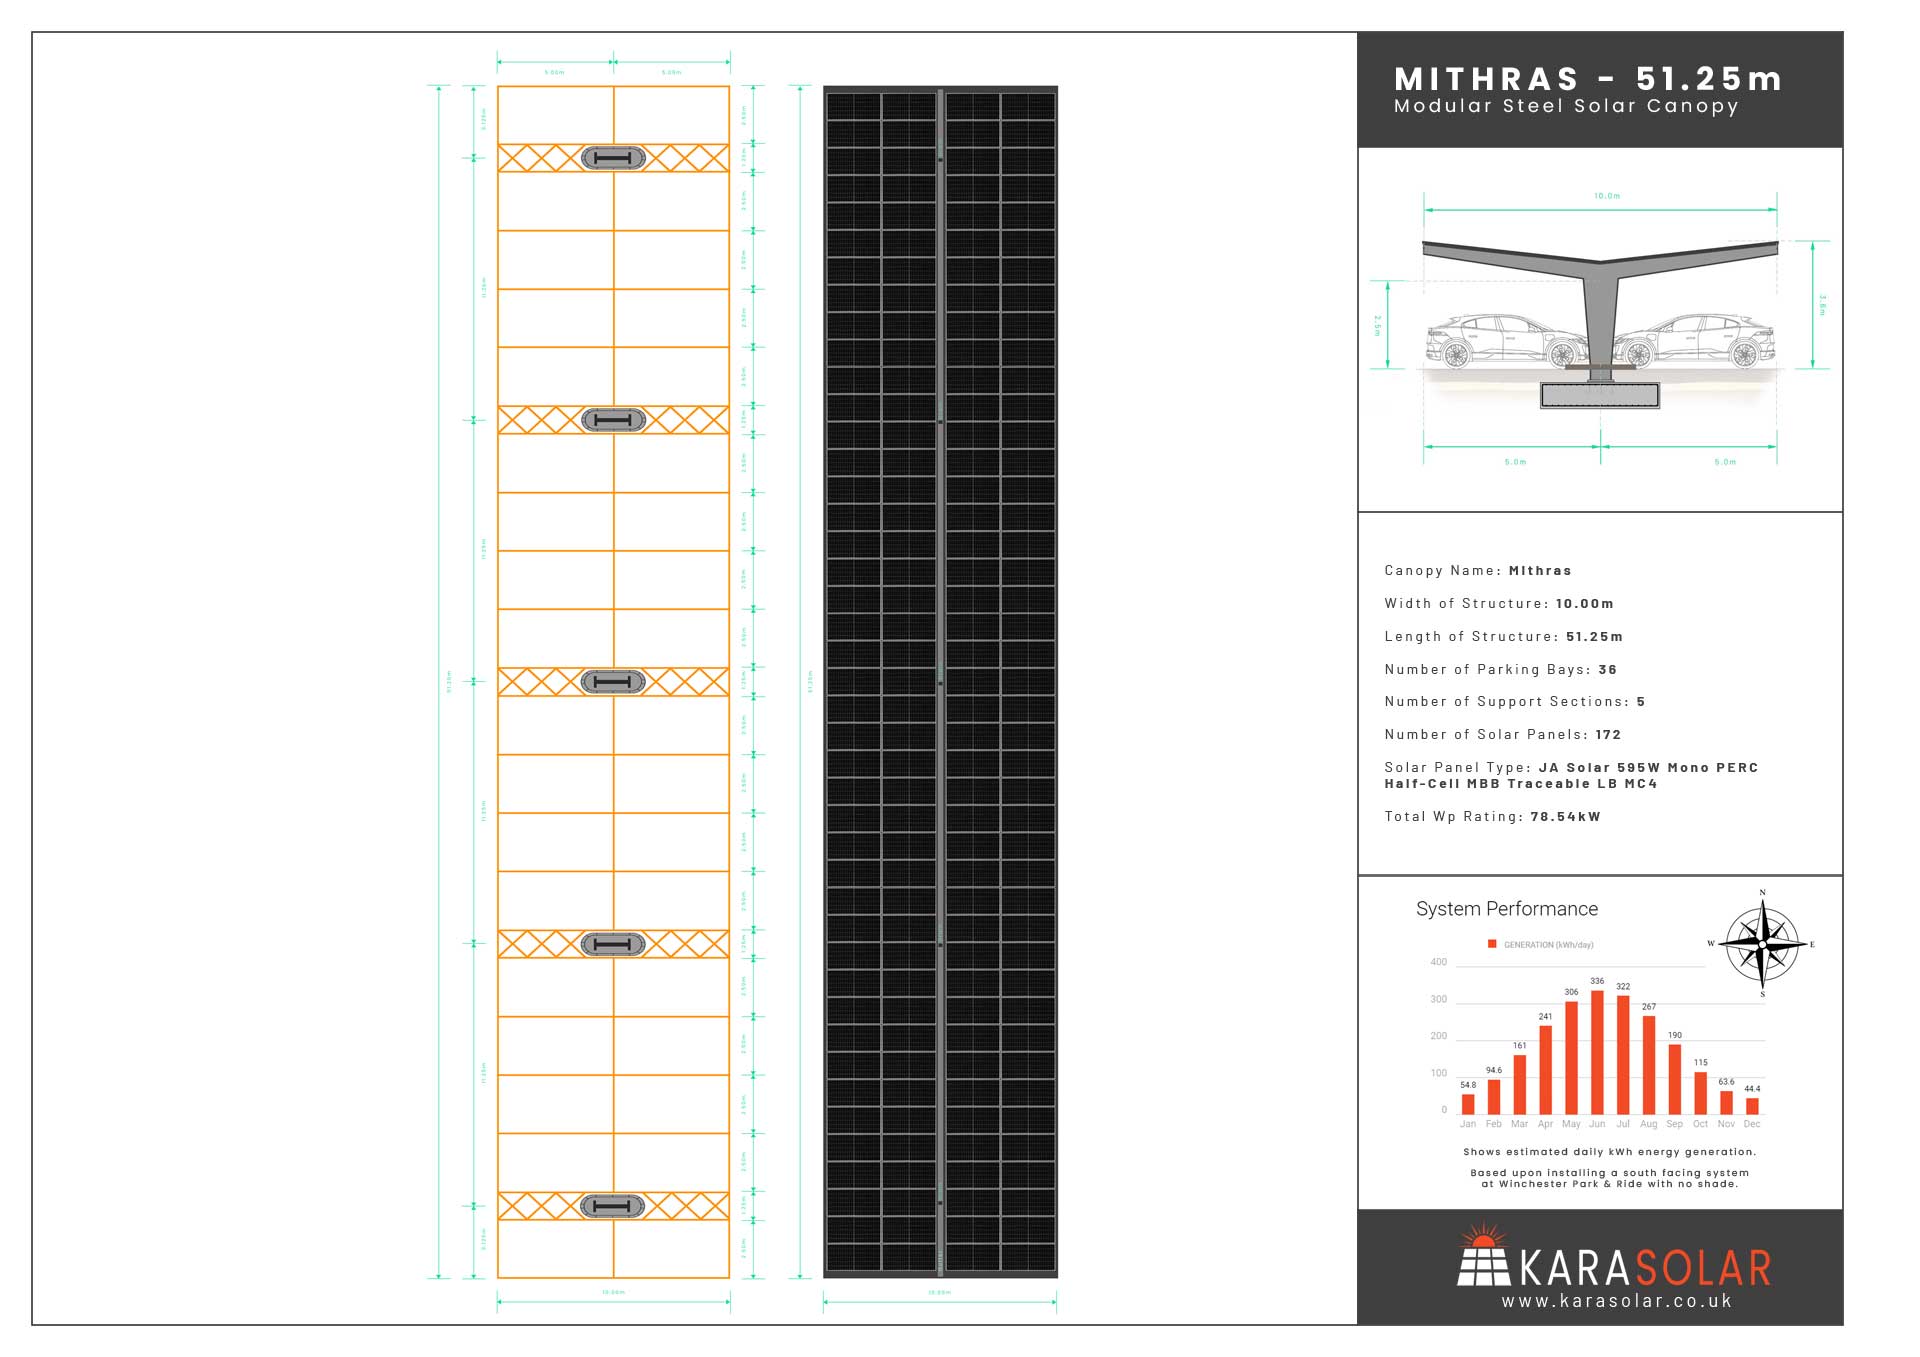 Mithras-Steel-Solar-Canopy-Parking-Layout-51.25m-Doc